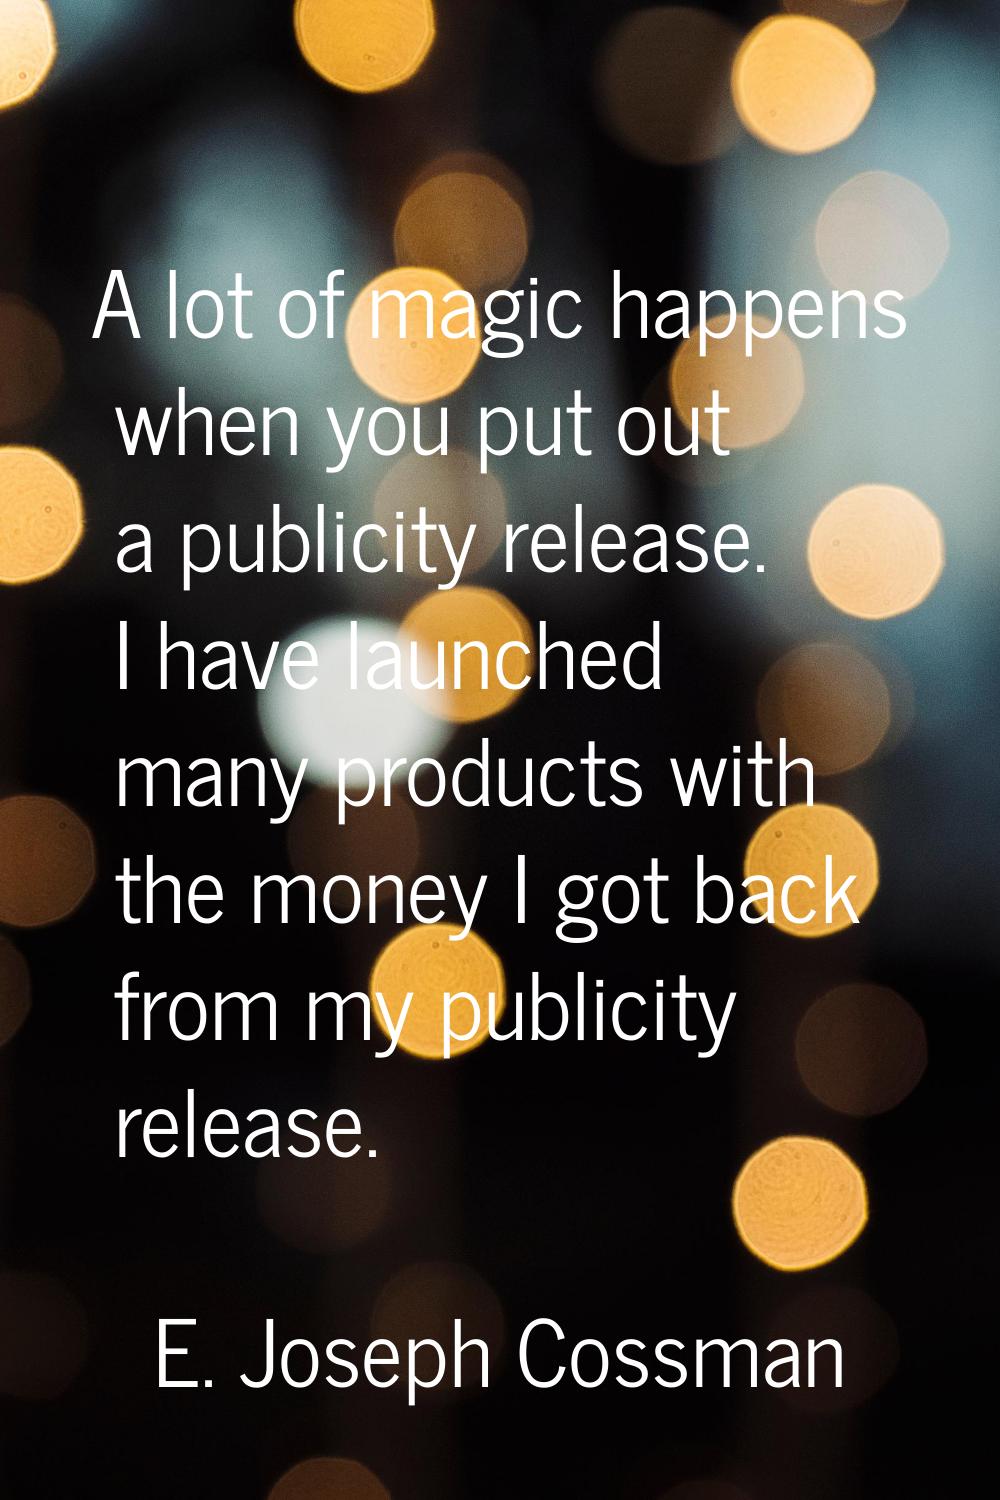 A lot of magic happens when you put out a publicity release. I have launched many products with the